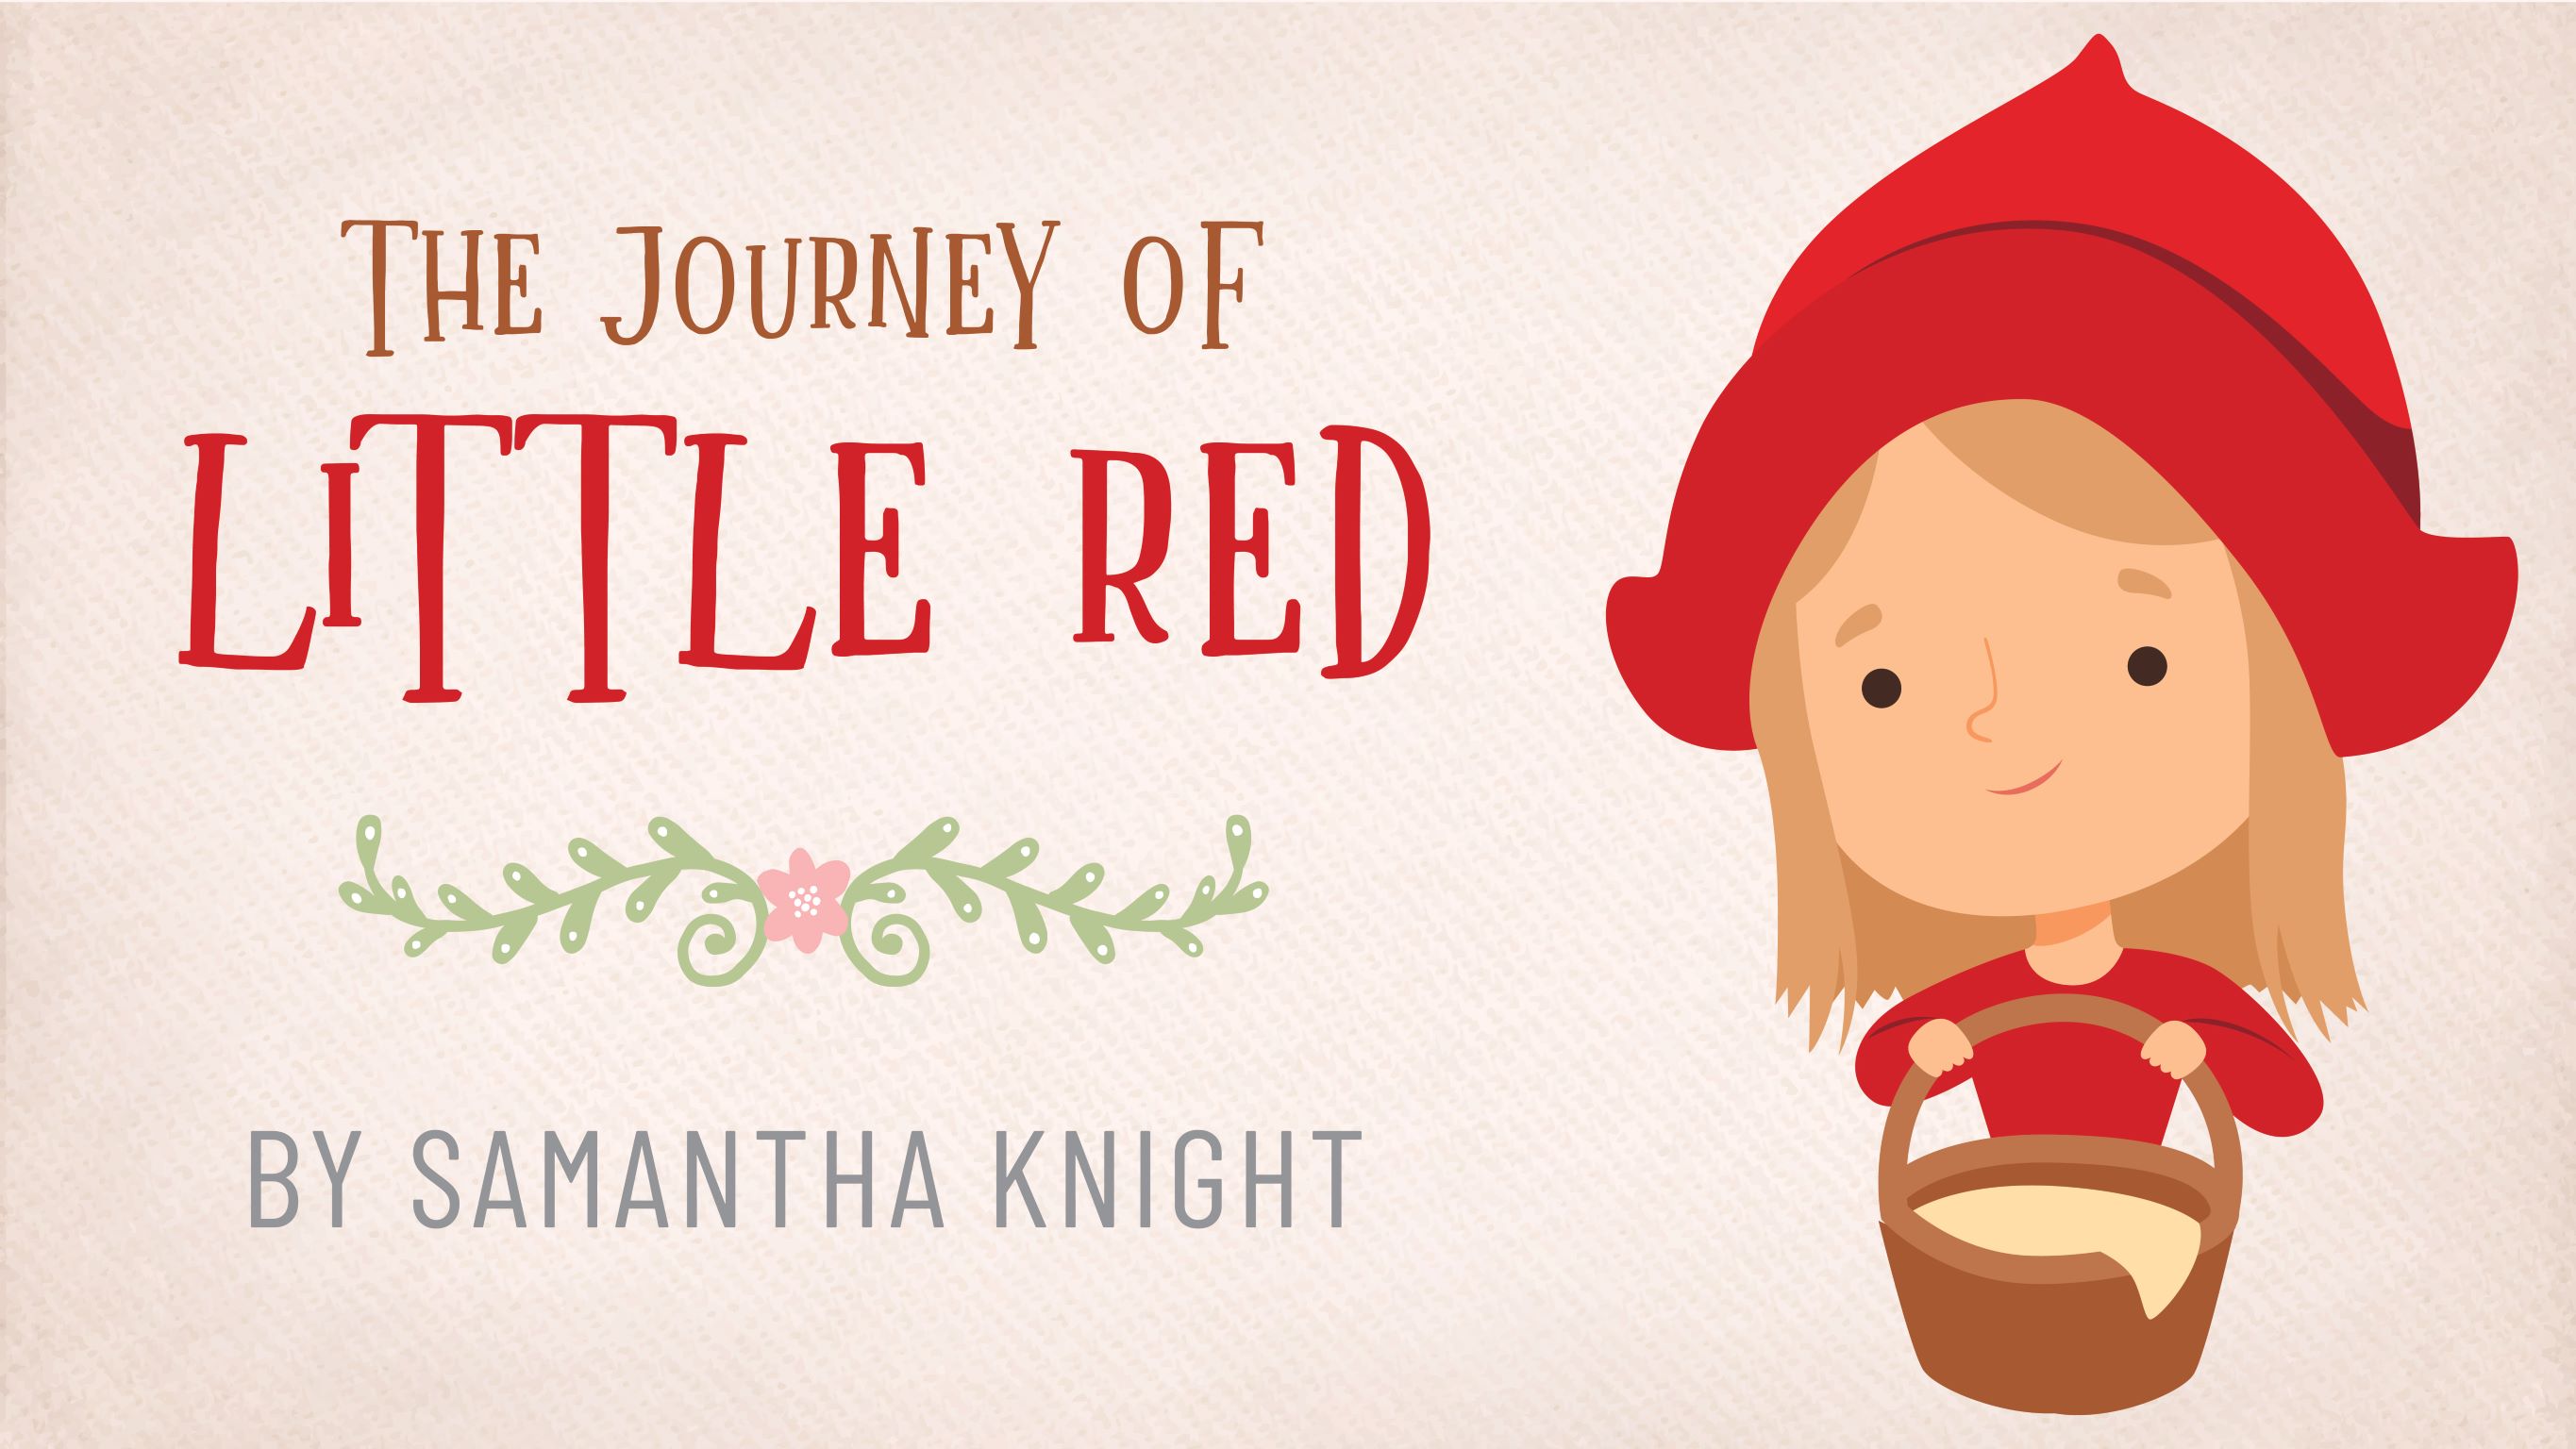 The Journey of Little Red by Samantha Knight